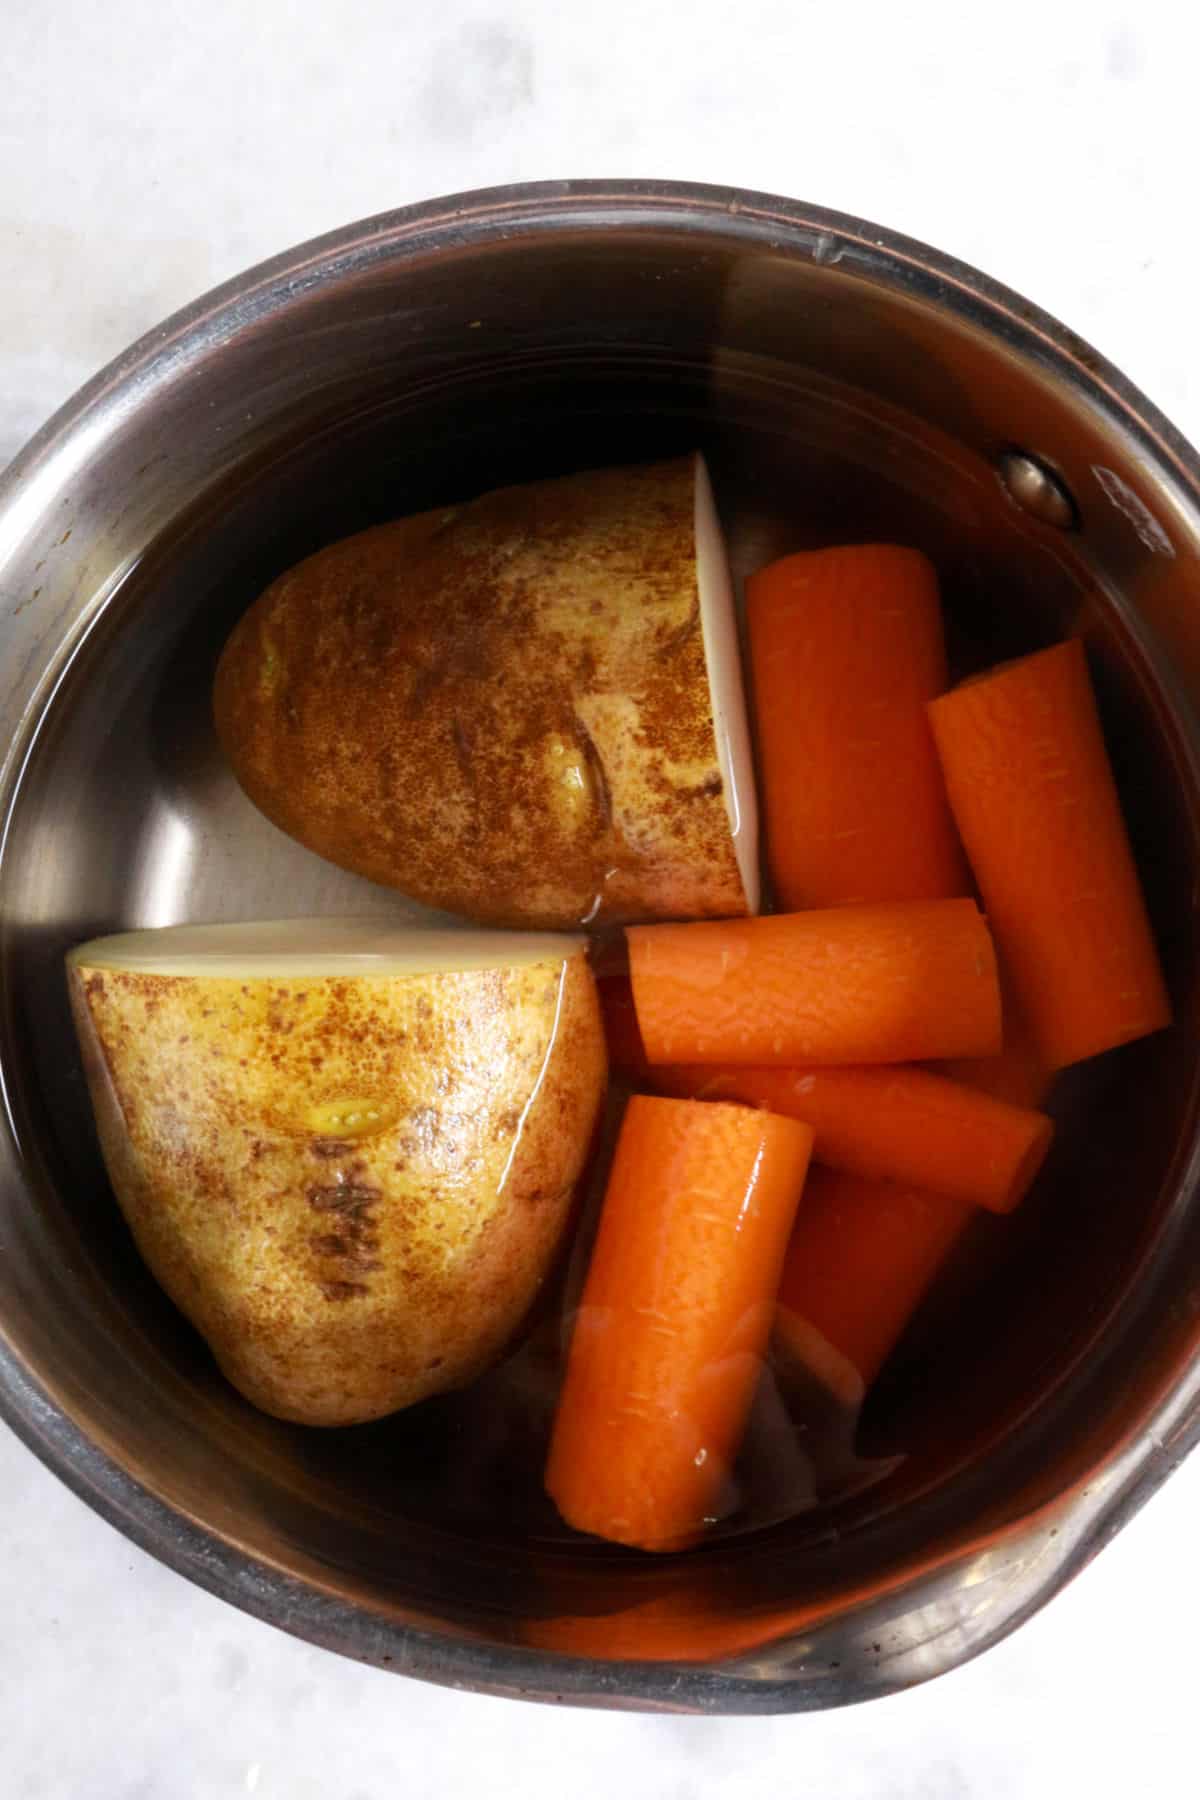 Boiling potatoes and carrots in water